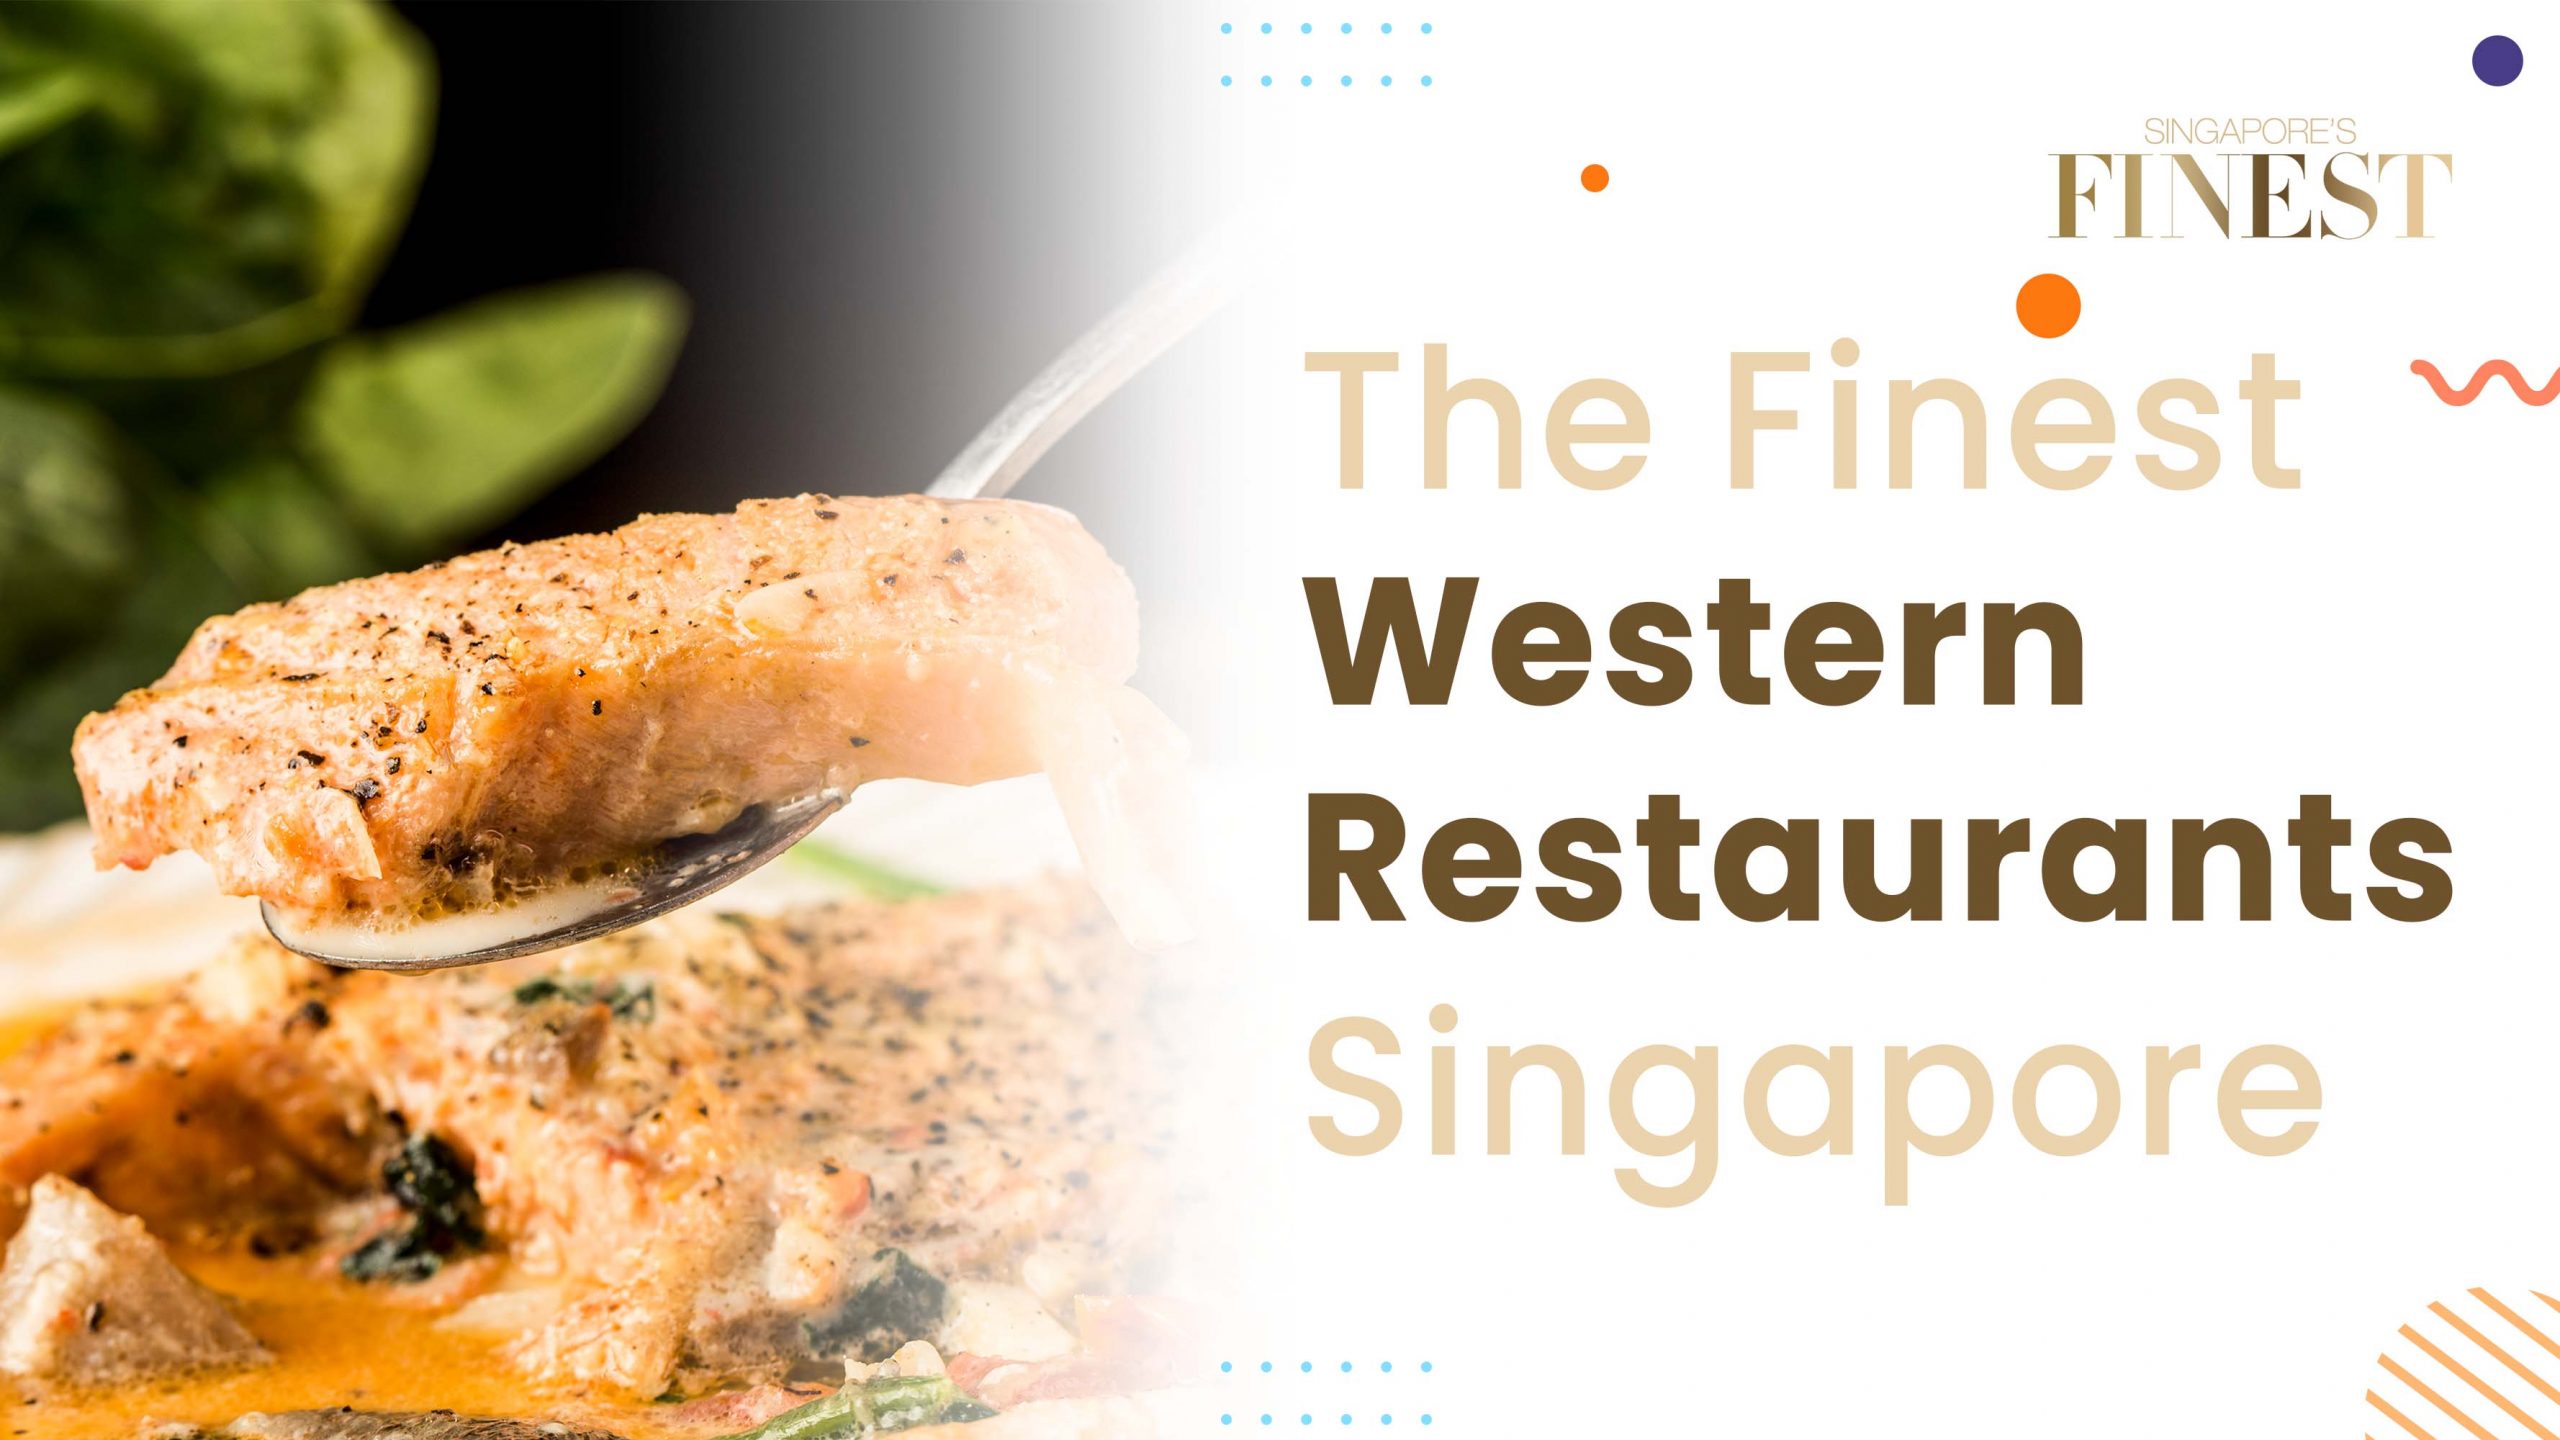 The Finest Western Food Restaurants in Singapore